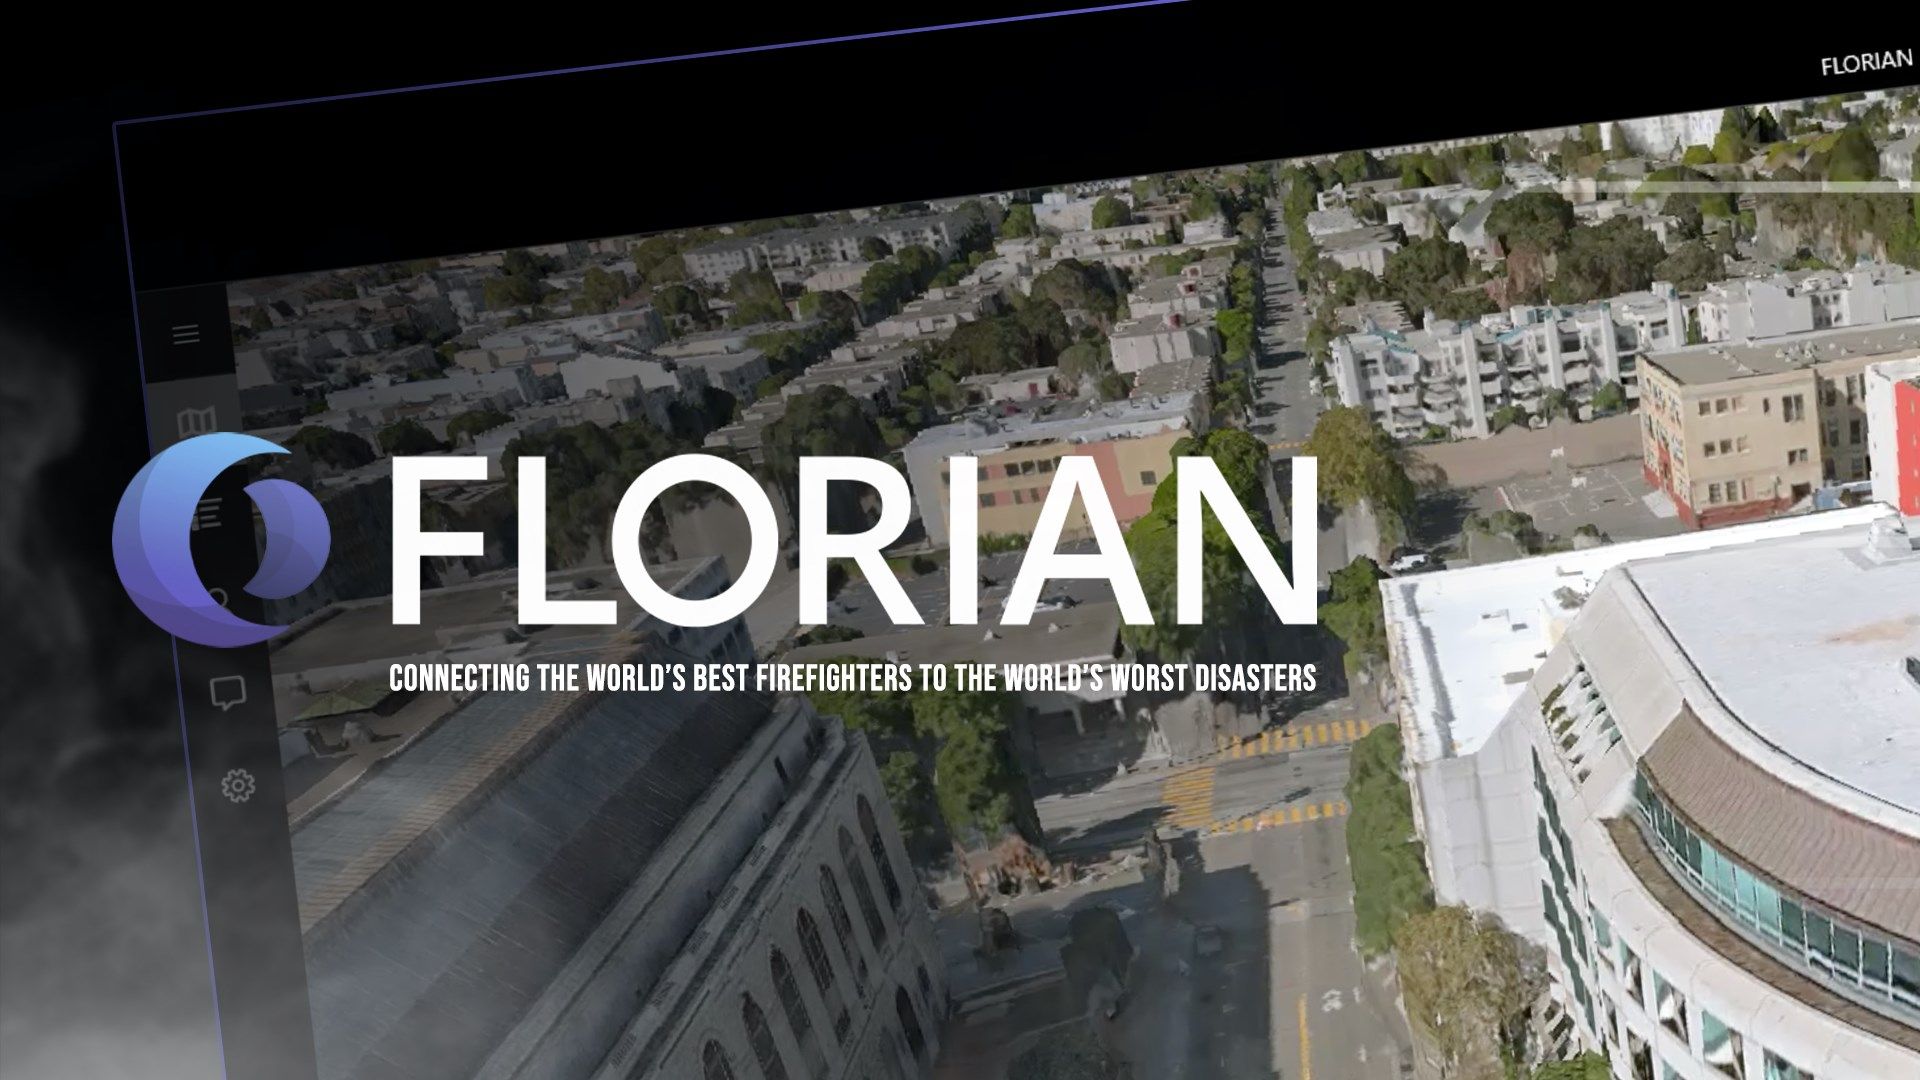 Florian - Connecting the World's Best Firefighters to the World's Worst Disasters